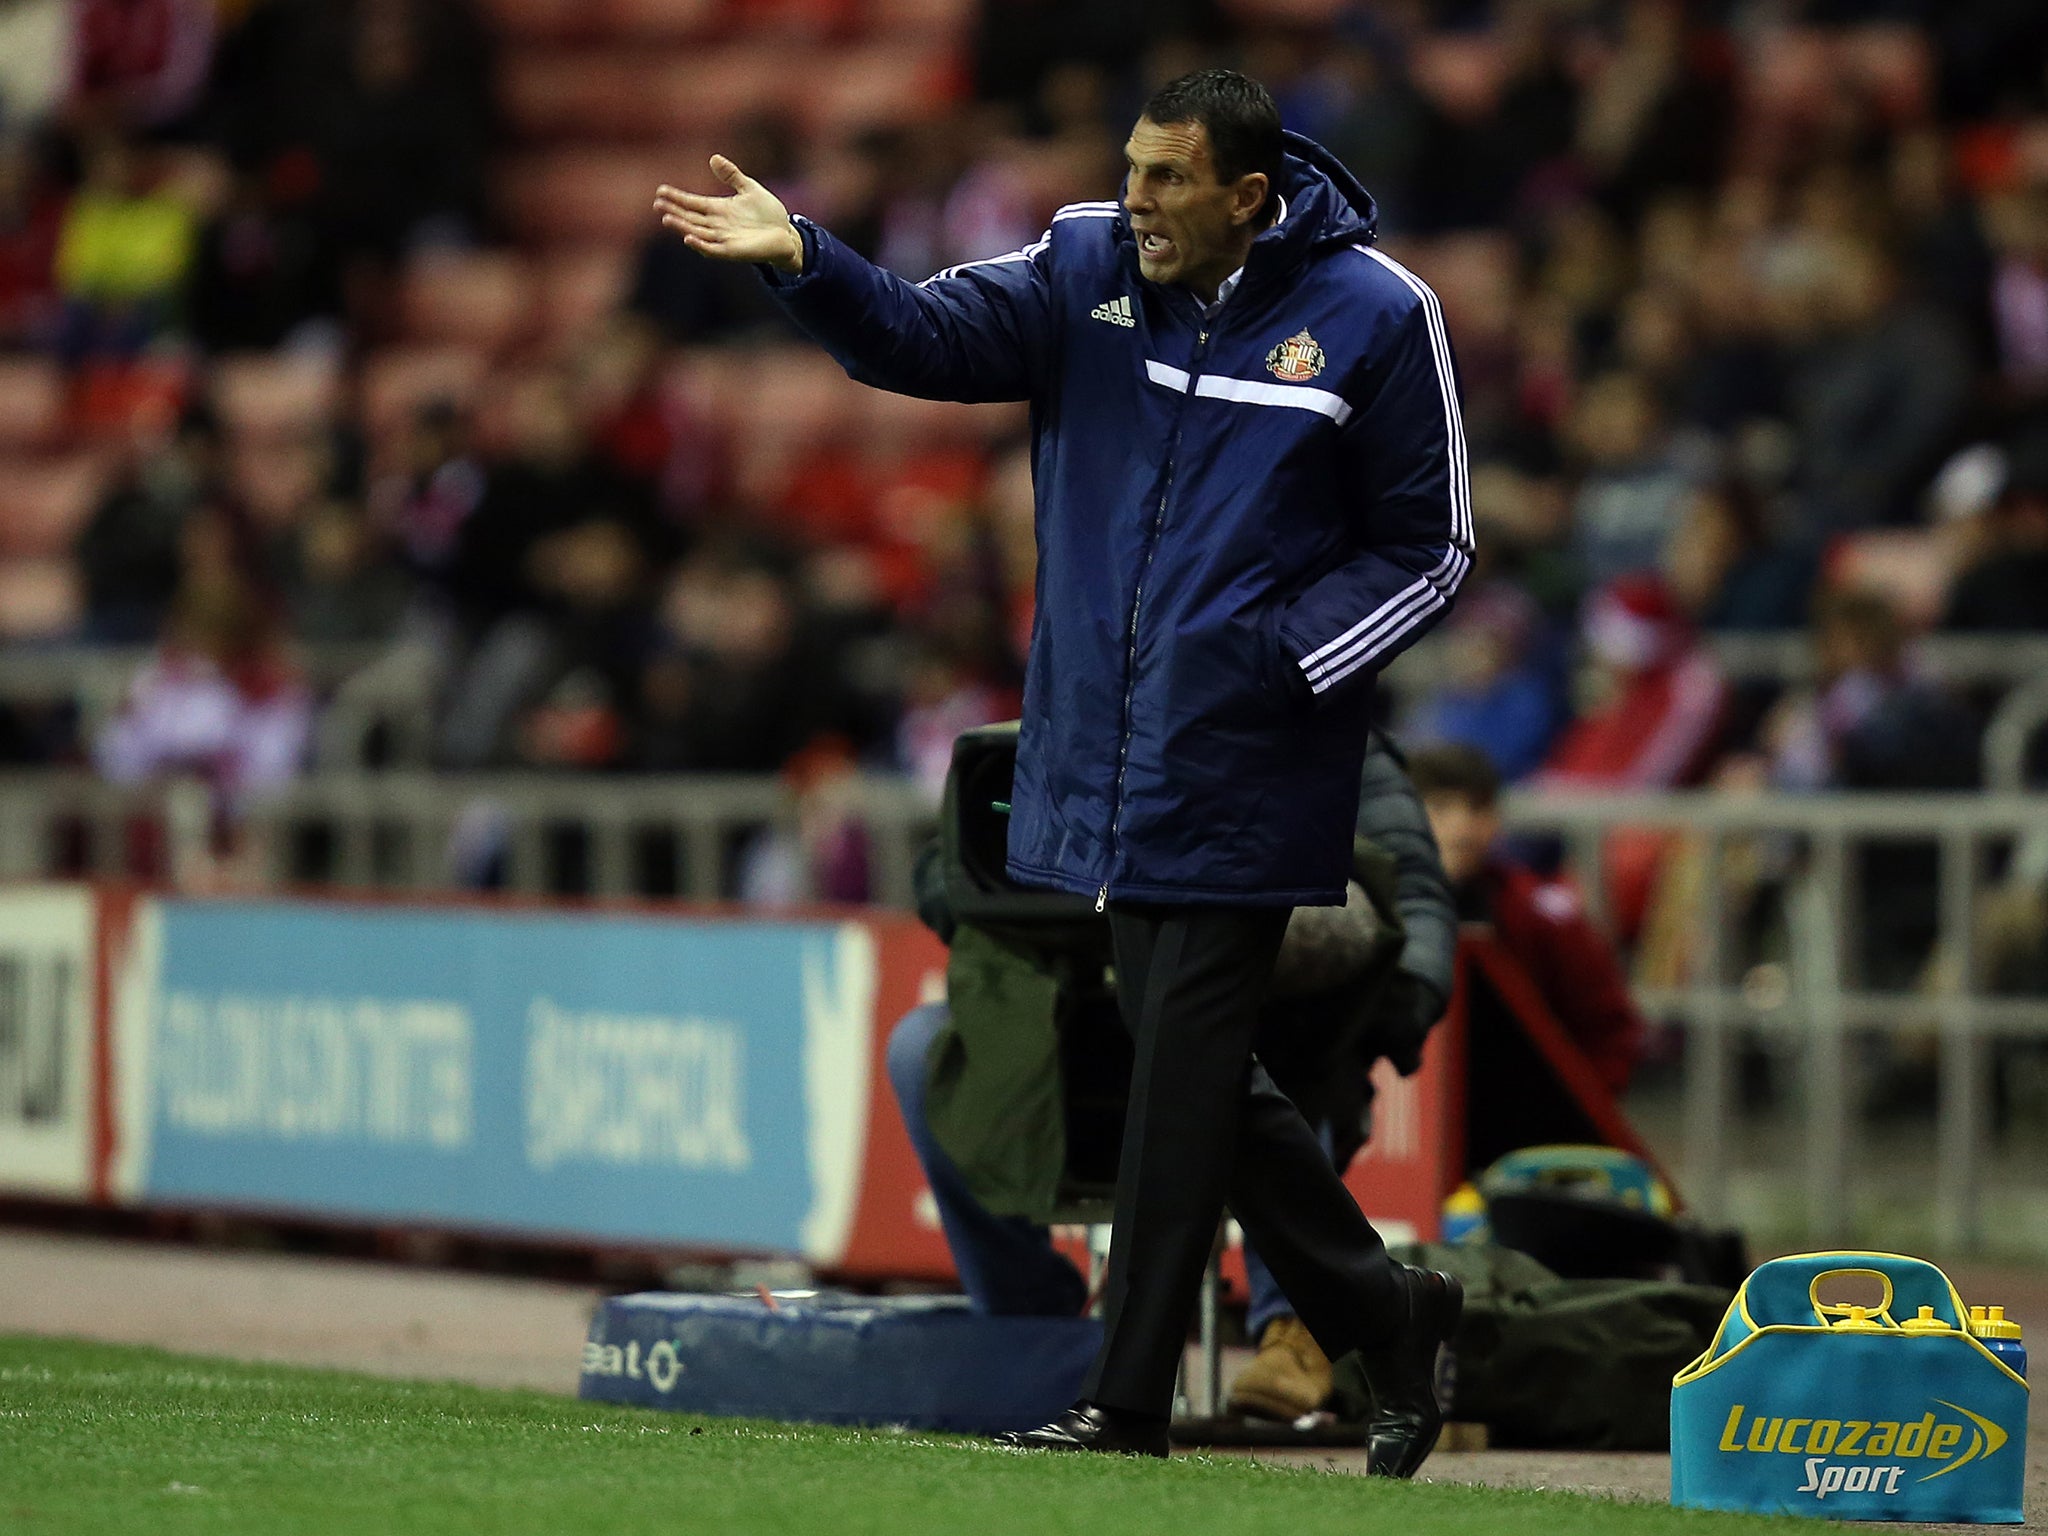 Gus Poyet remonstrates on the sideline during Sunderland's 2-1 defeat to Tottenham